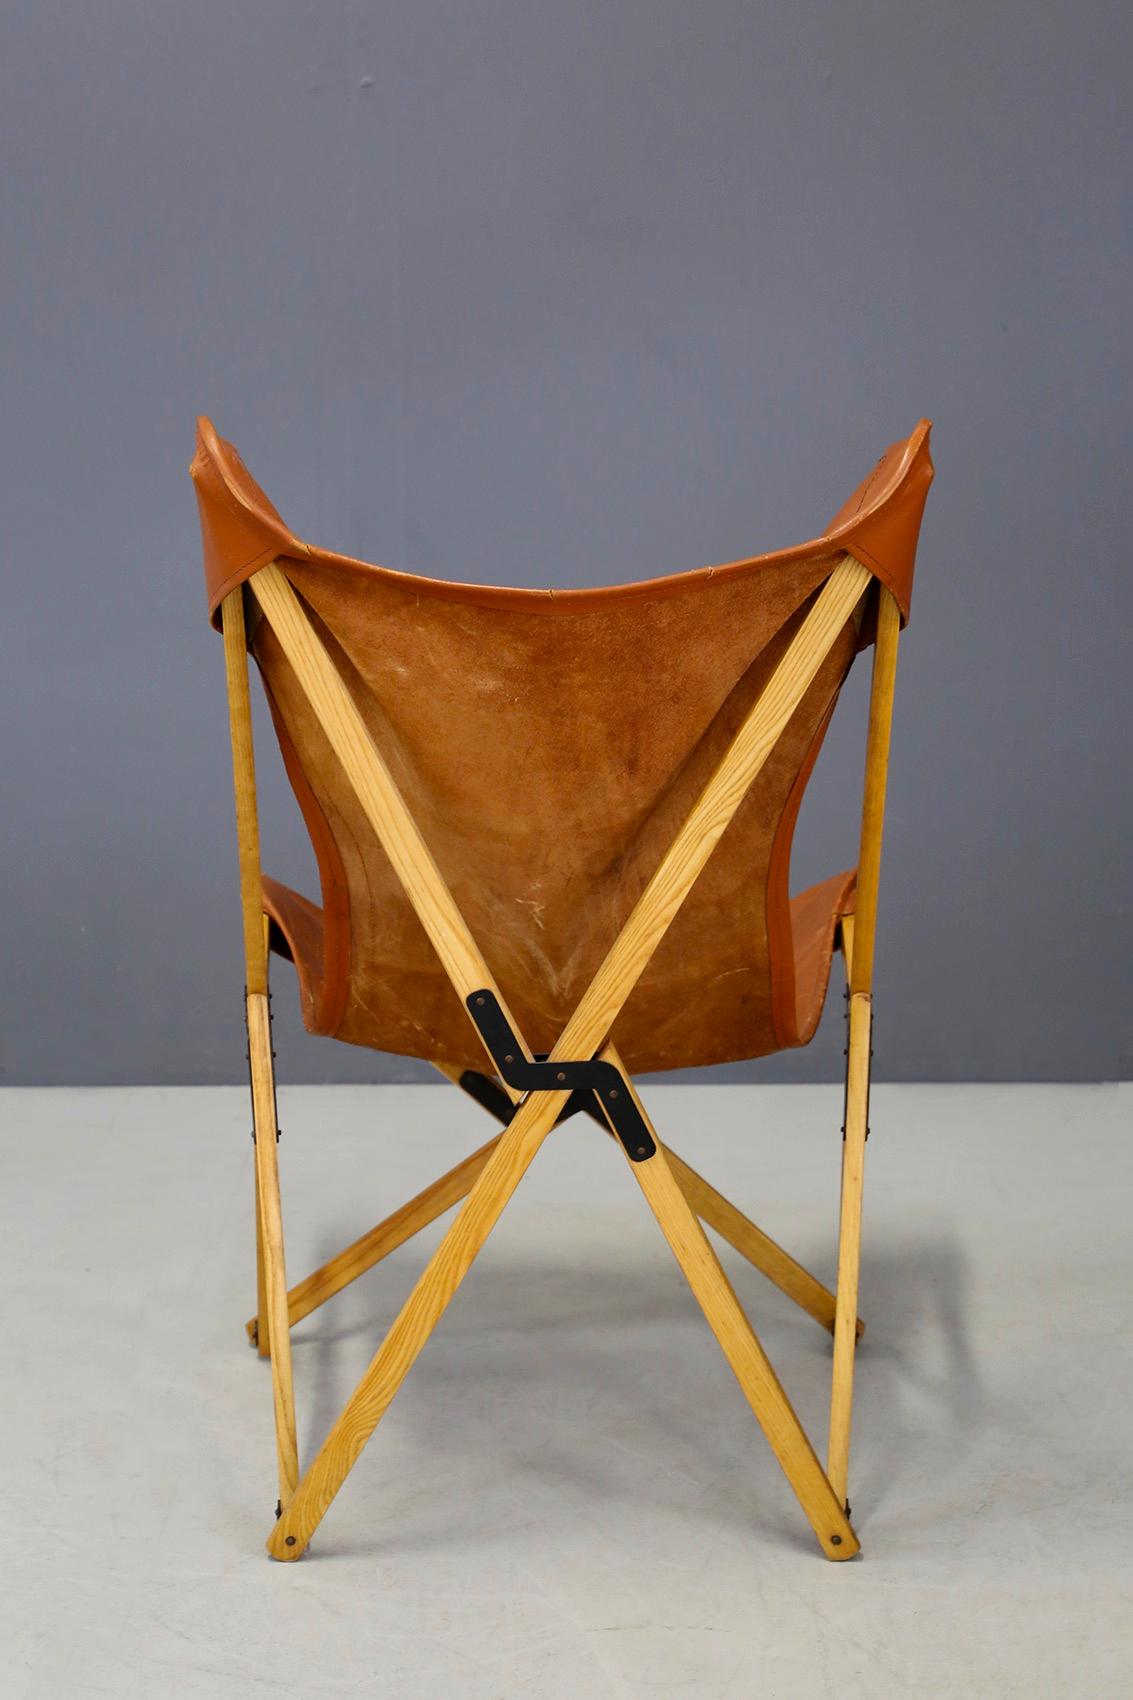 Tripolina Folding Chair by Viganò in Leather and Teak from circa 1970s 3